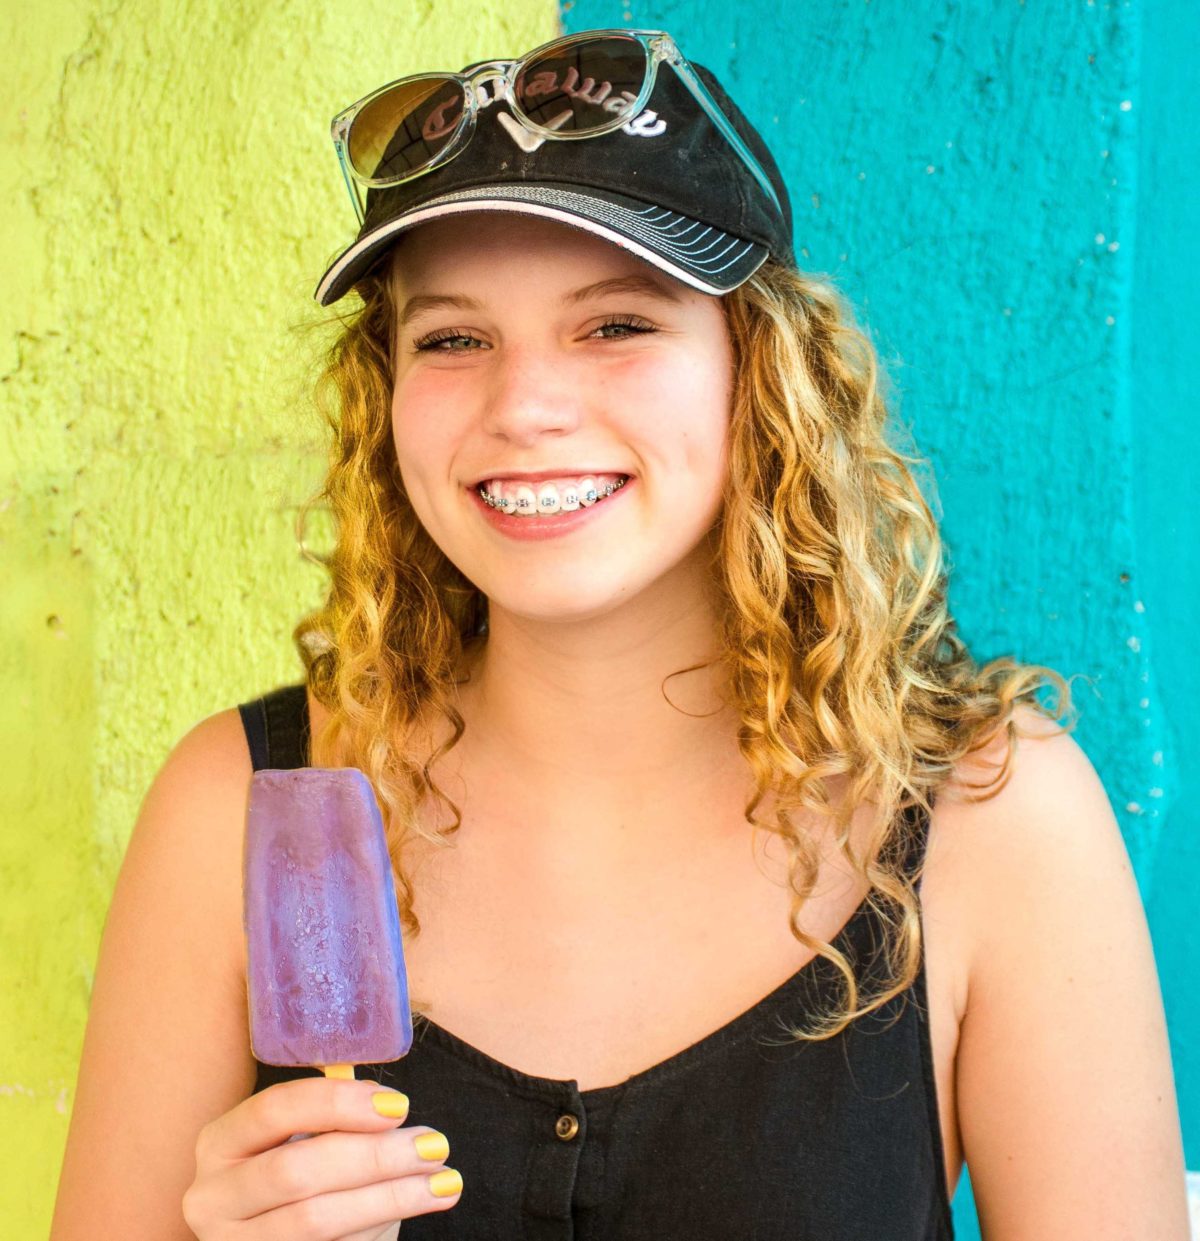 Young woman smiling and eating a grape popsicle.